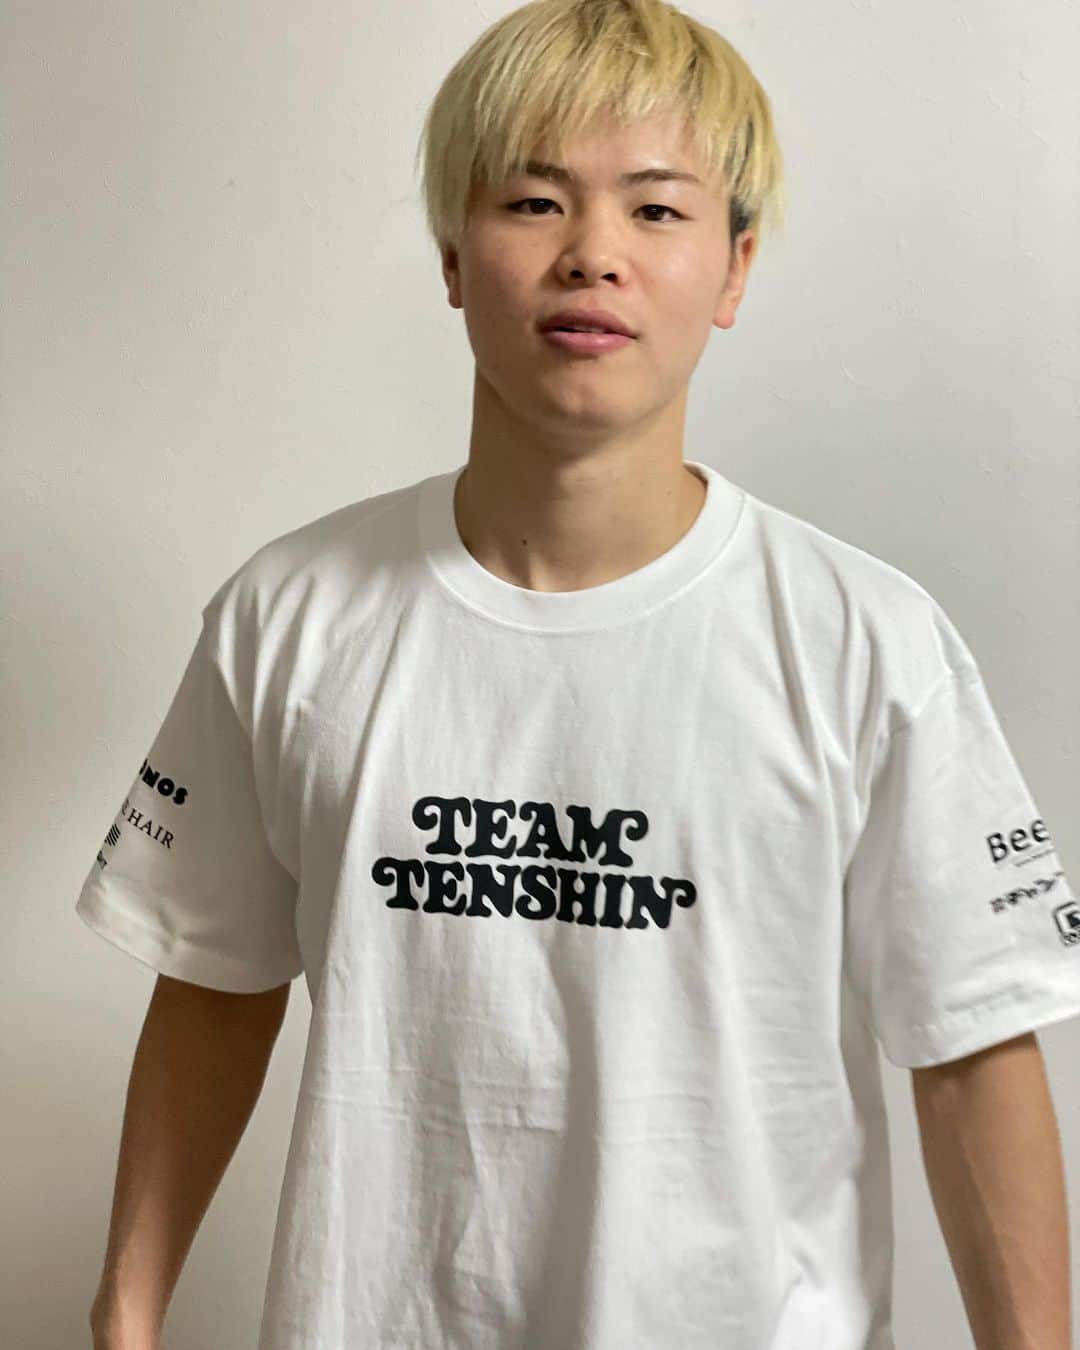 Wasted Youth TEAM TENSHIN 限定 Tシャツ 那須川天心 - Tシャツ ...